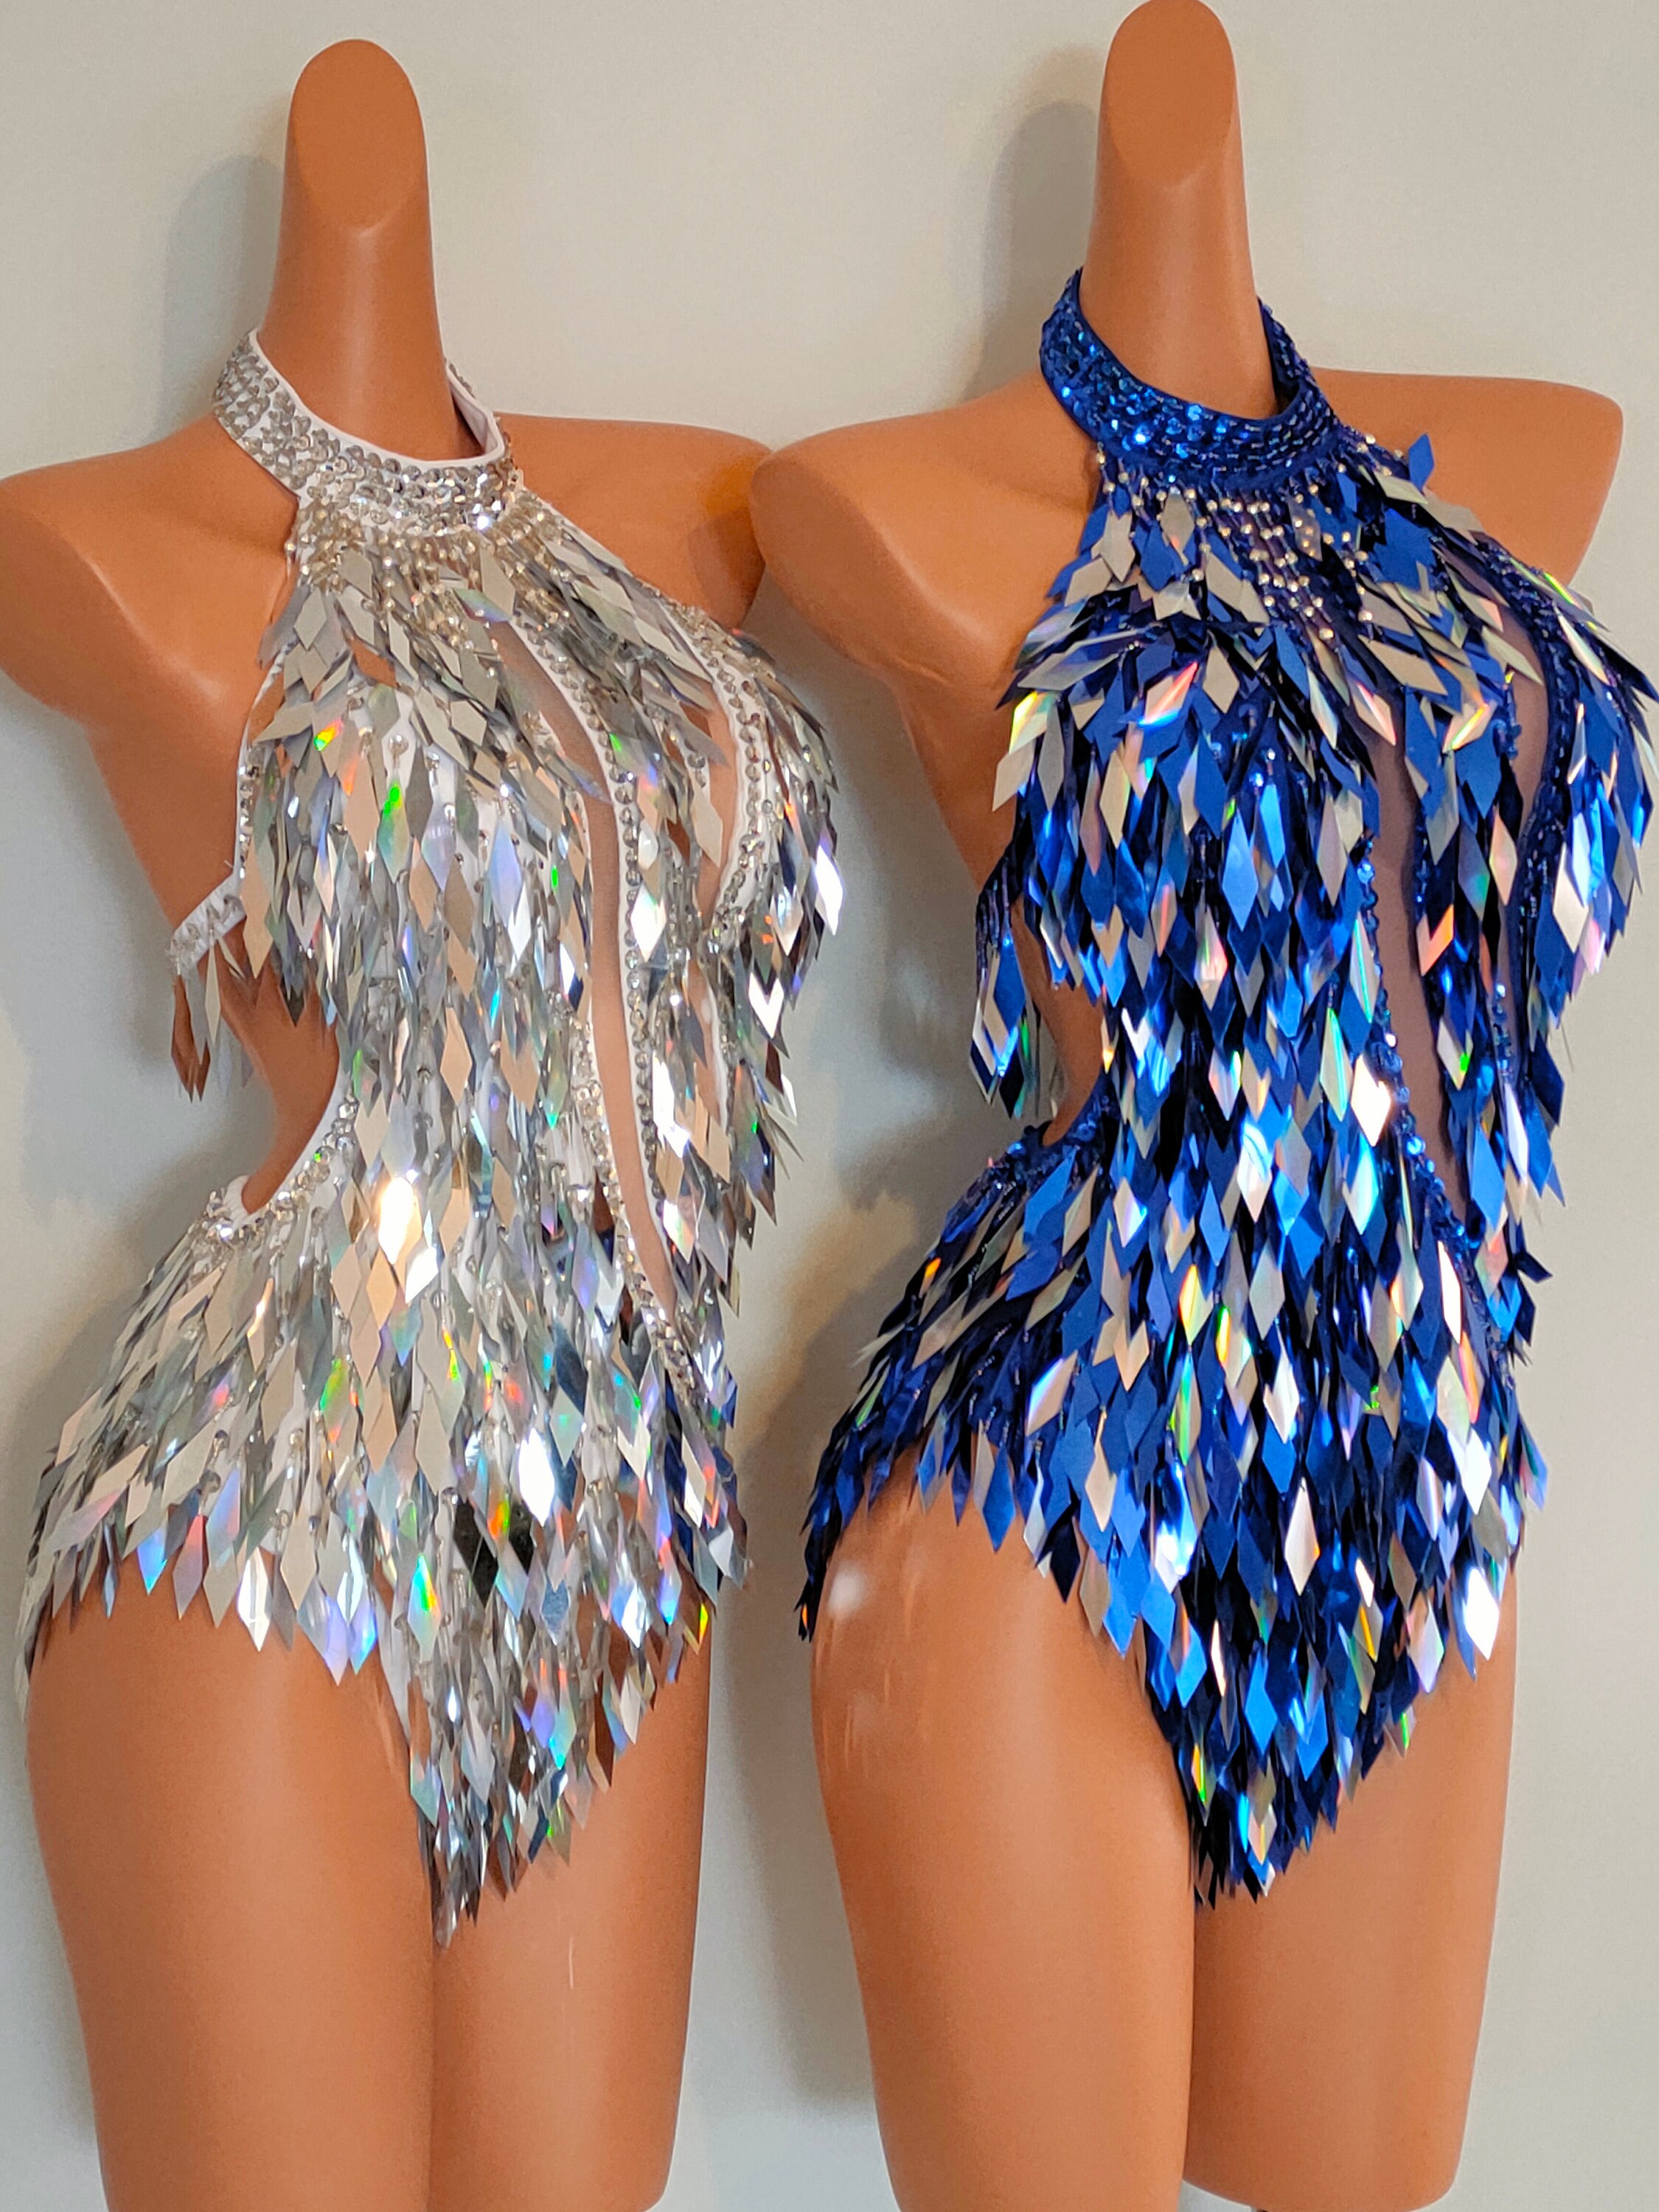 SILVER Crystal Sequin Beads Leotard-samba Costumes Carnival Show